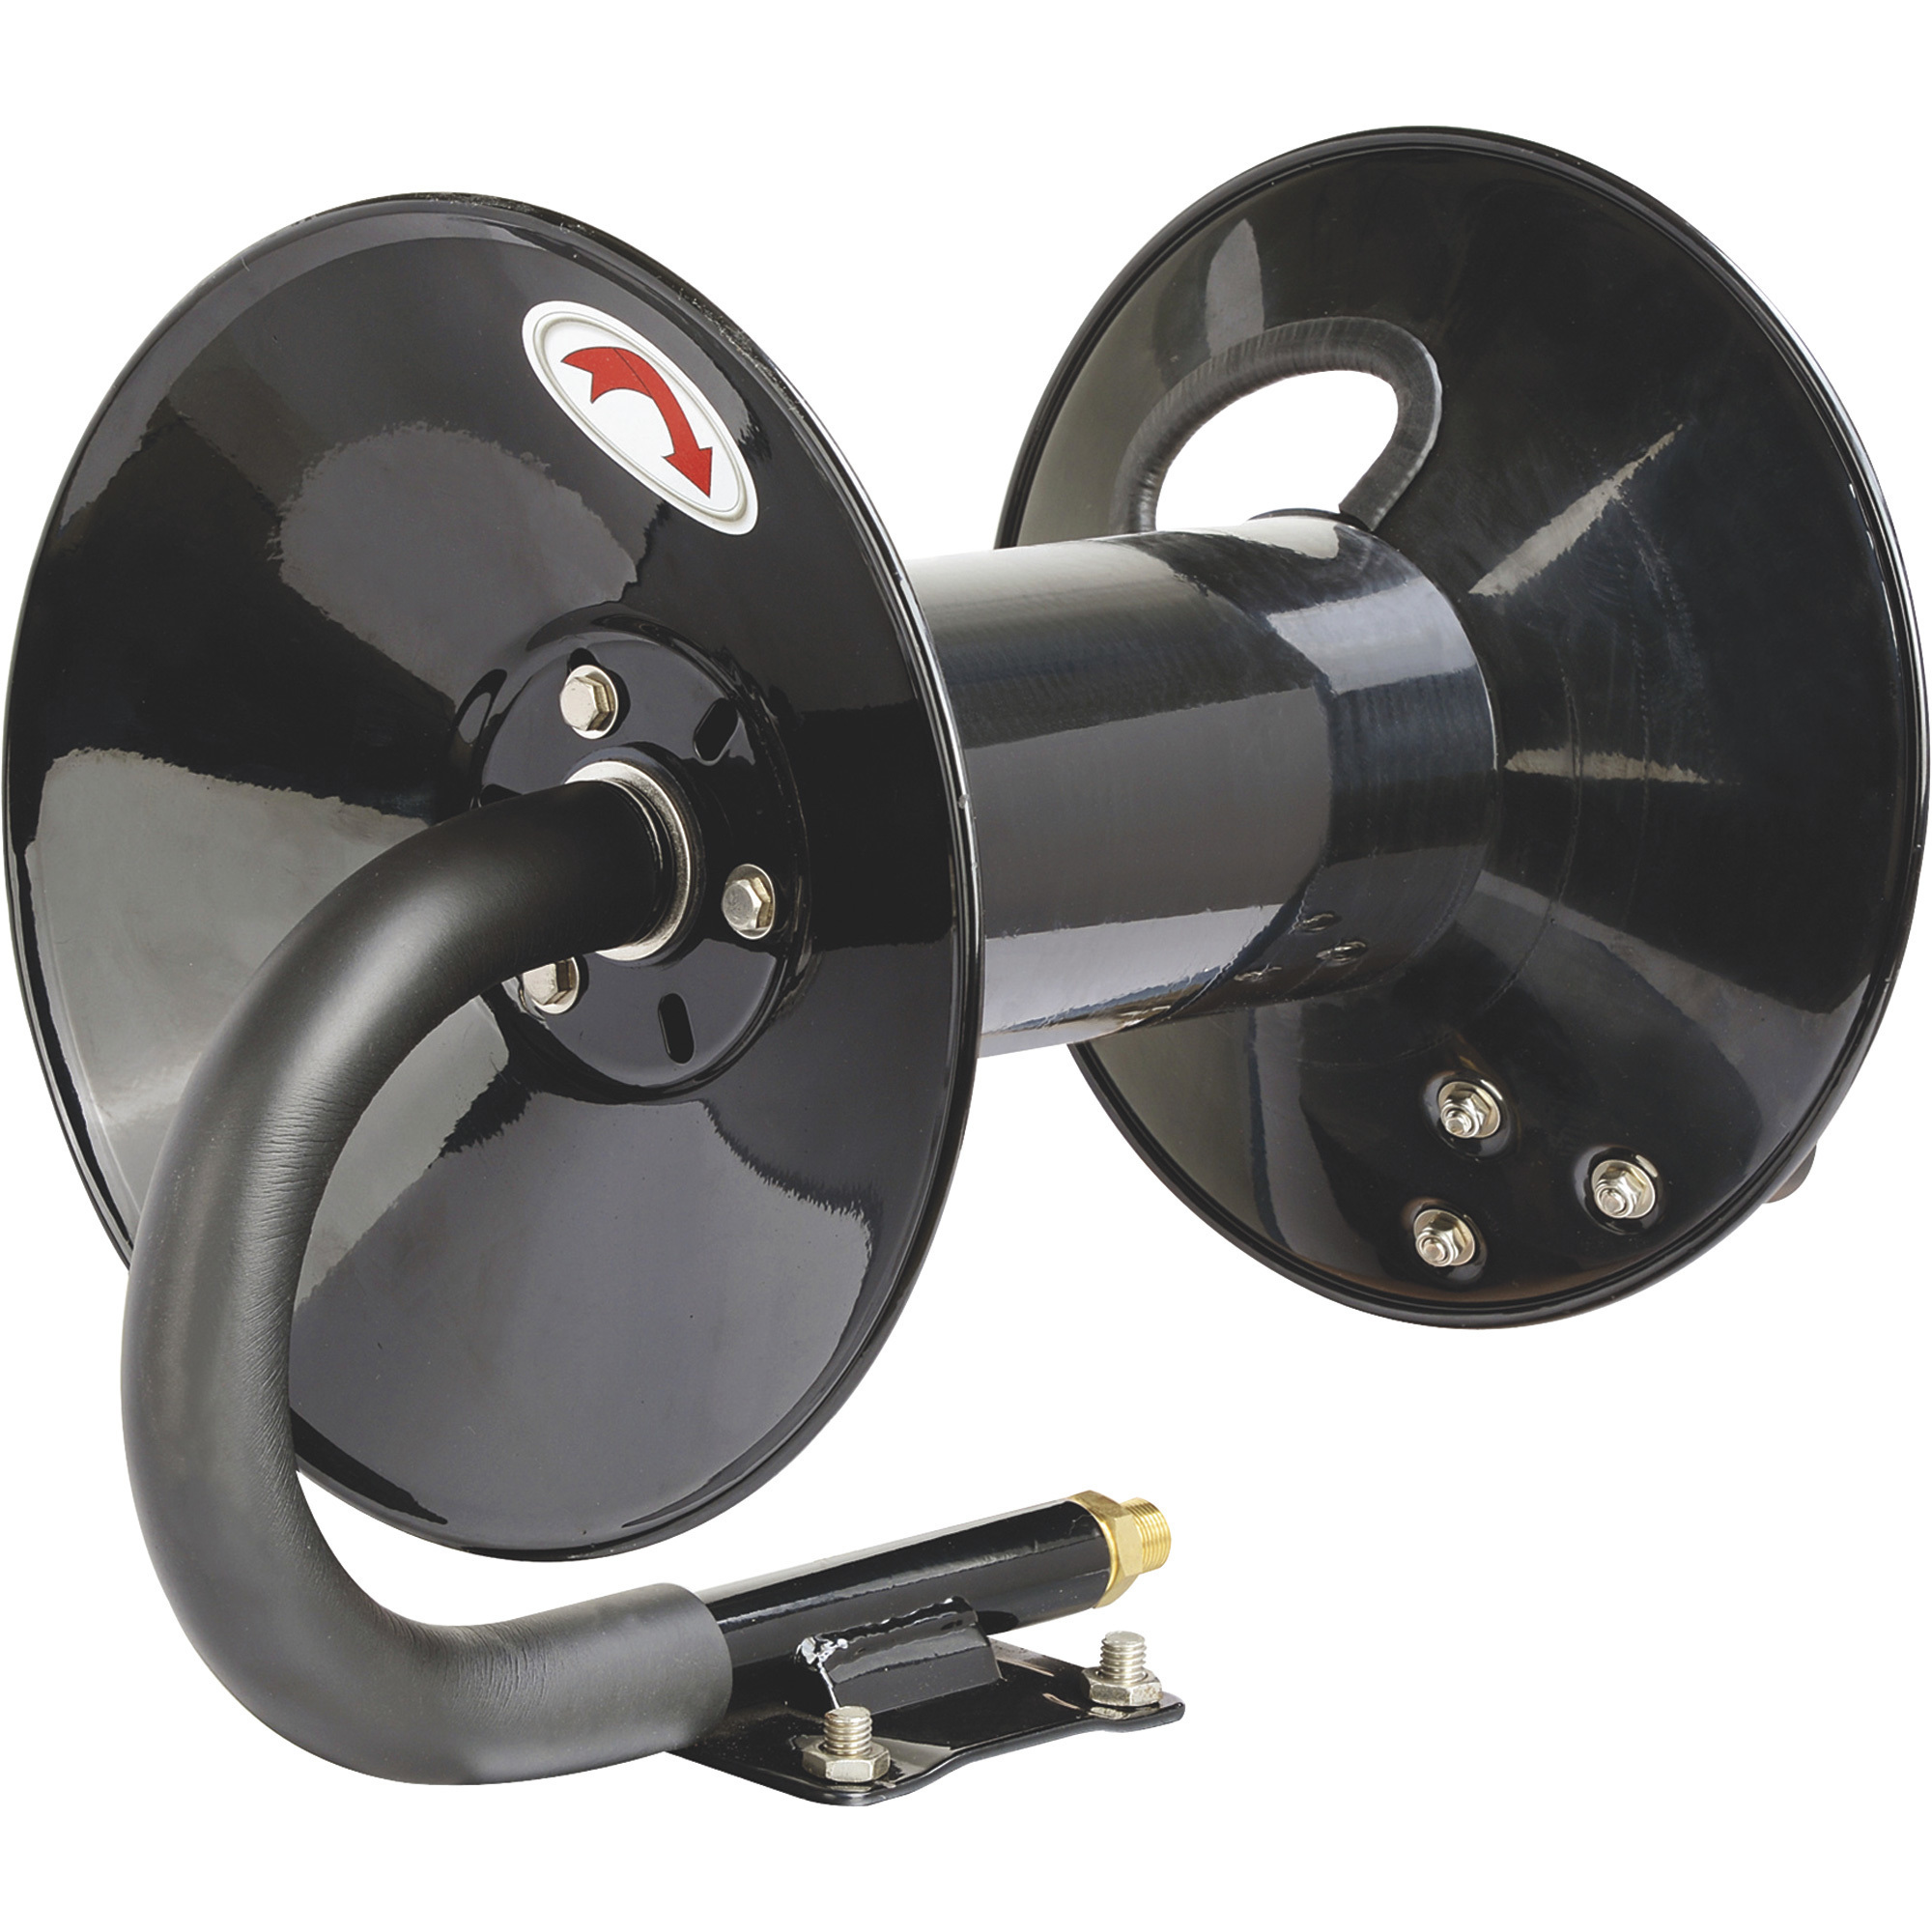 Ironton Air Hose Reel with Hand Brake, Holds 3/8in. x 100ft. Hose